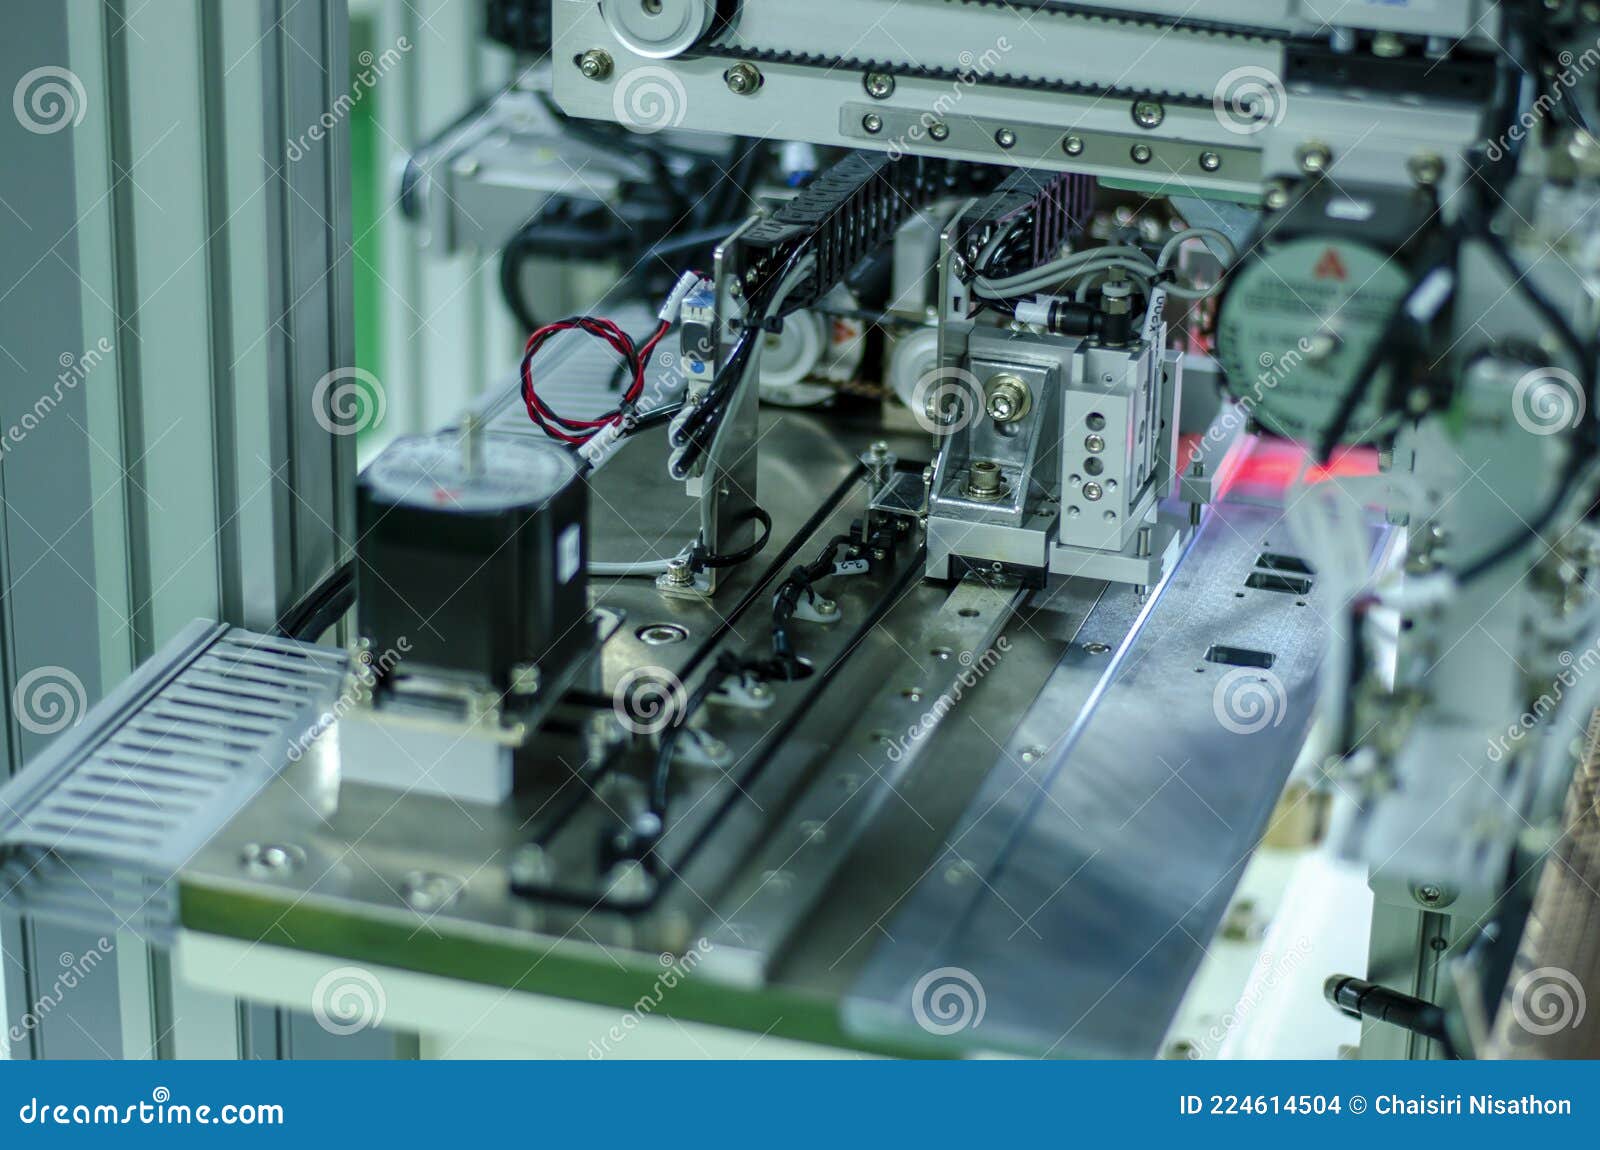 the industrial machine in the factory semiconductor industry